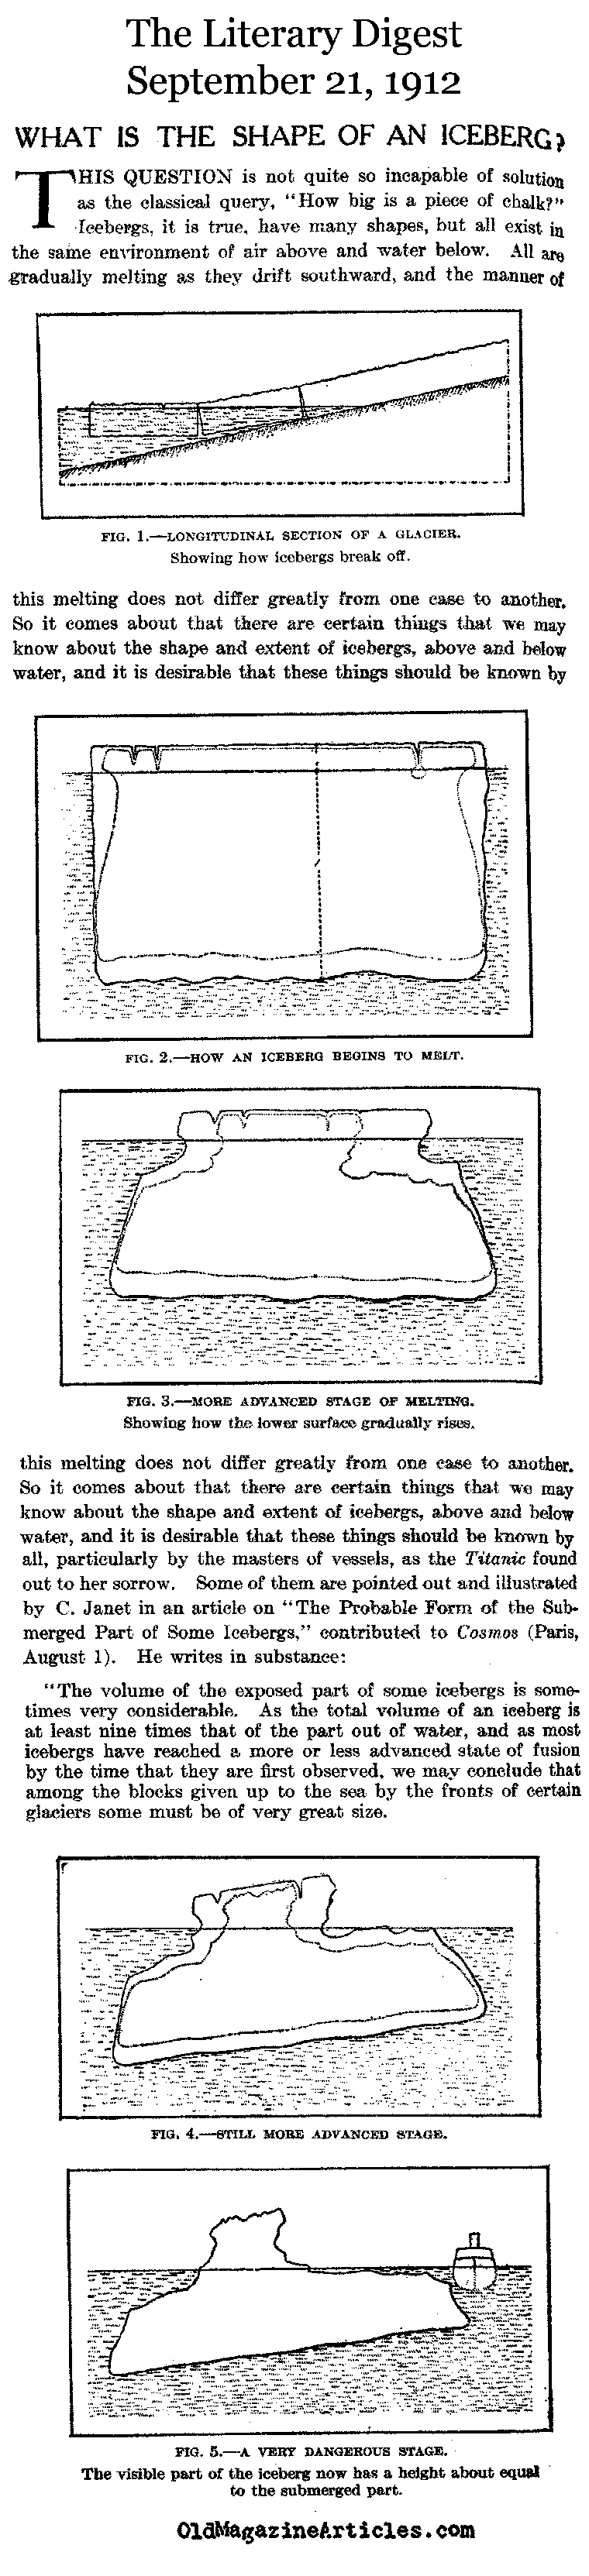 What is the Shape of an Iceberg? (Literary Digest, 1912)